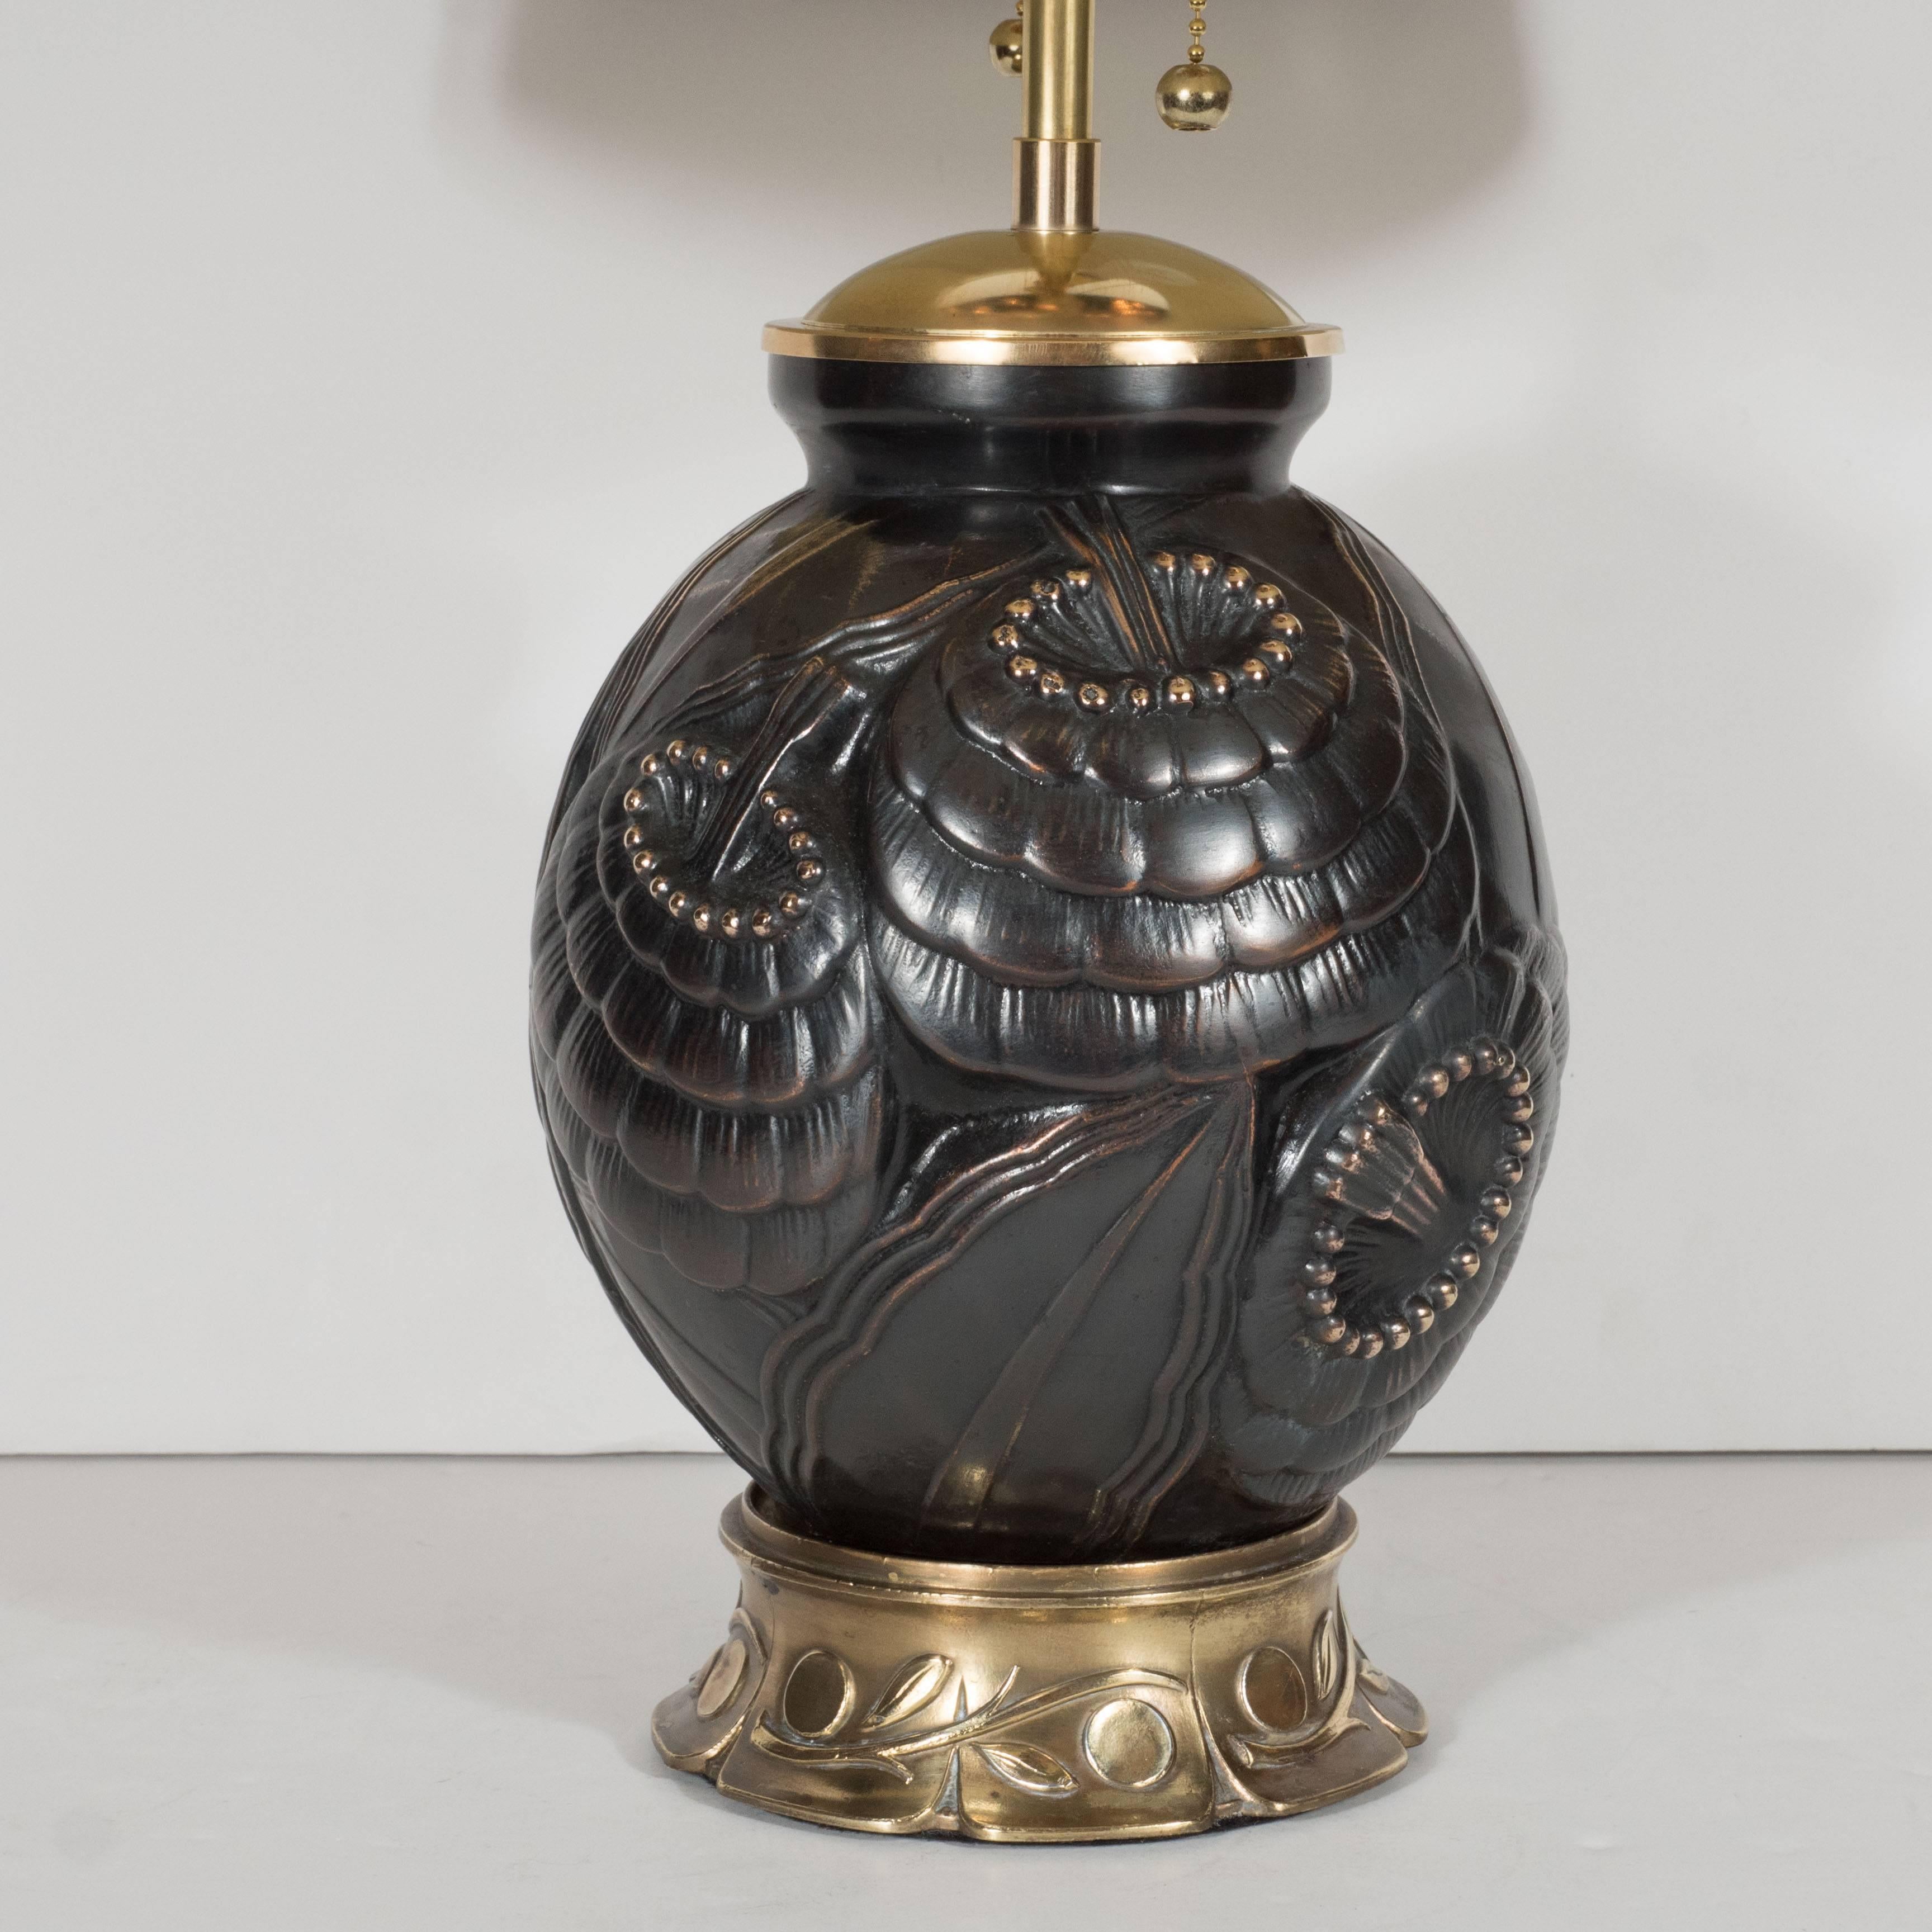 This exceptional lamp features a base and cap in antique brass and the body of the lamp is bronze with stylized floral and foliage detailing executed in an Art Deco Cubist manner in relief. The lamp has been completely rewired and is fitted with a